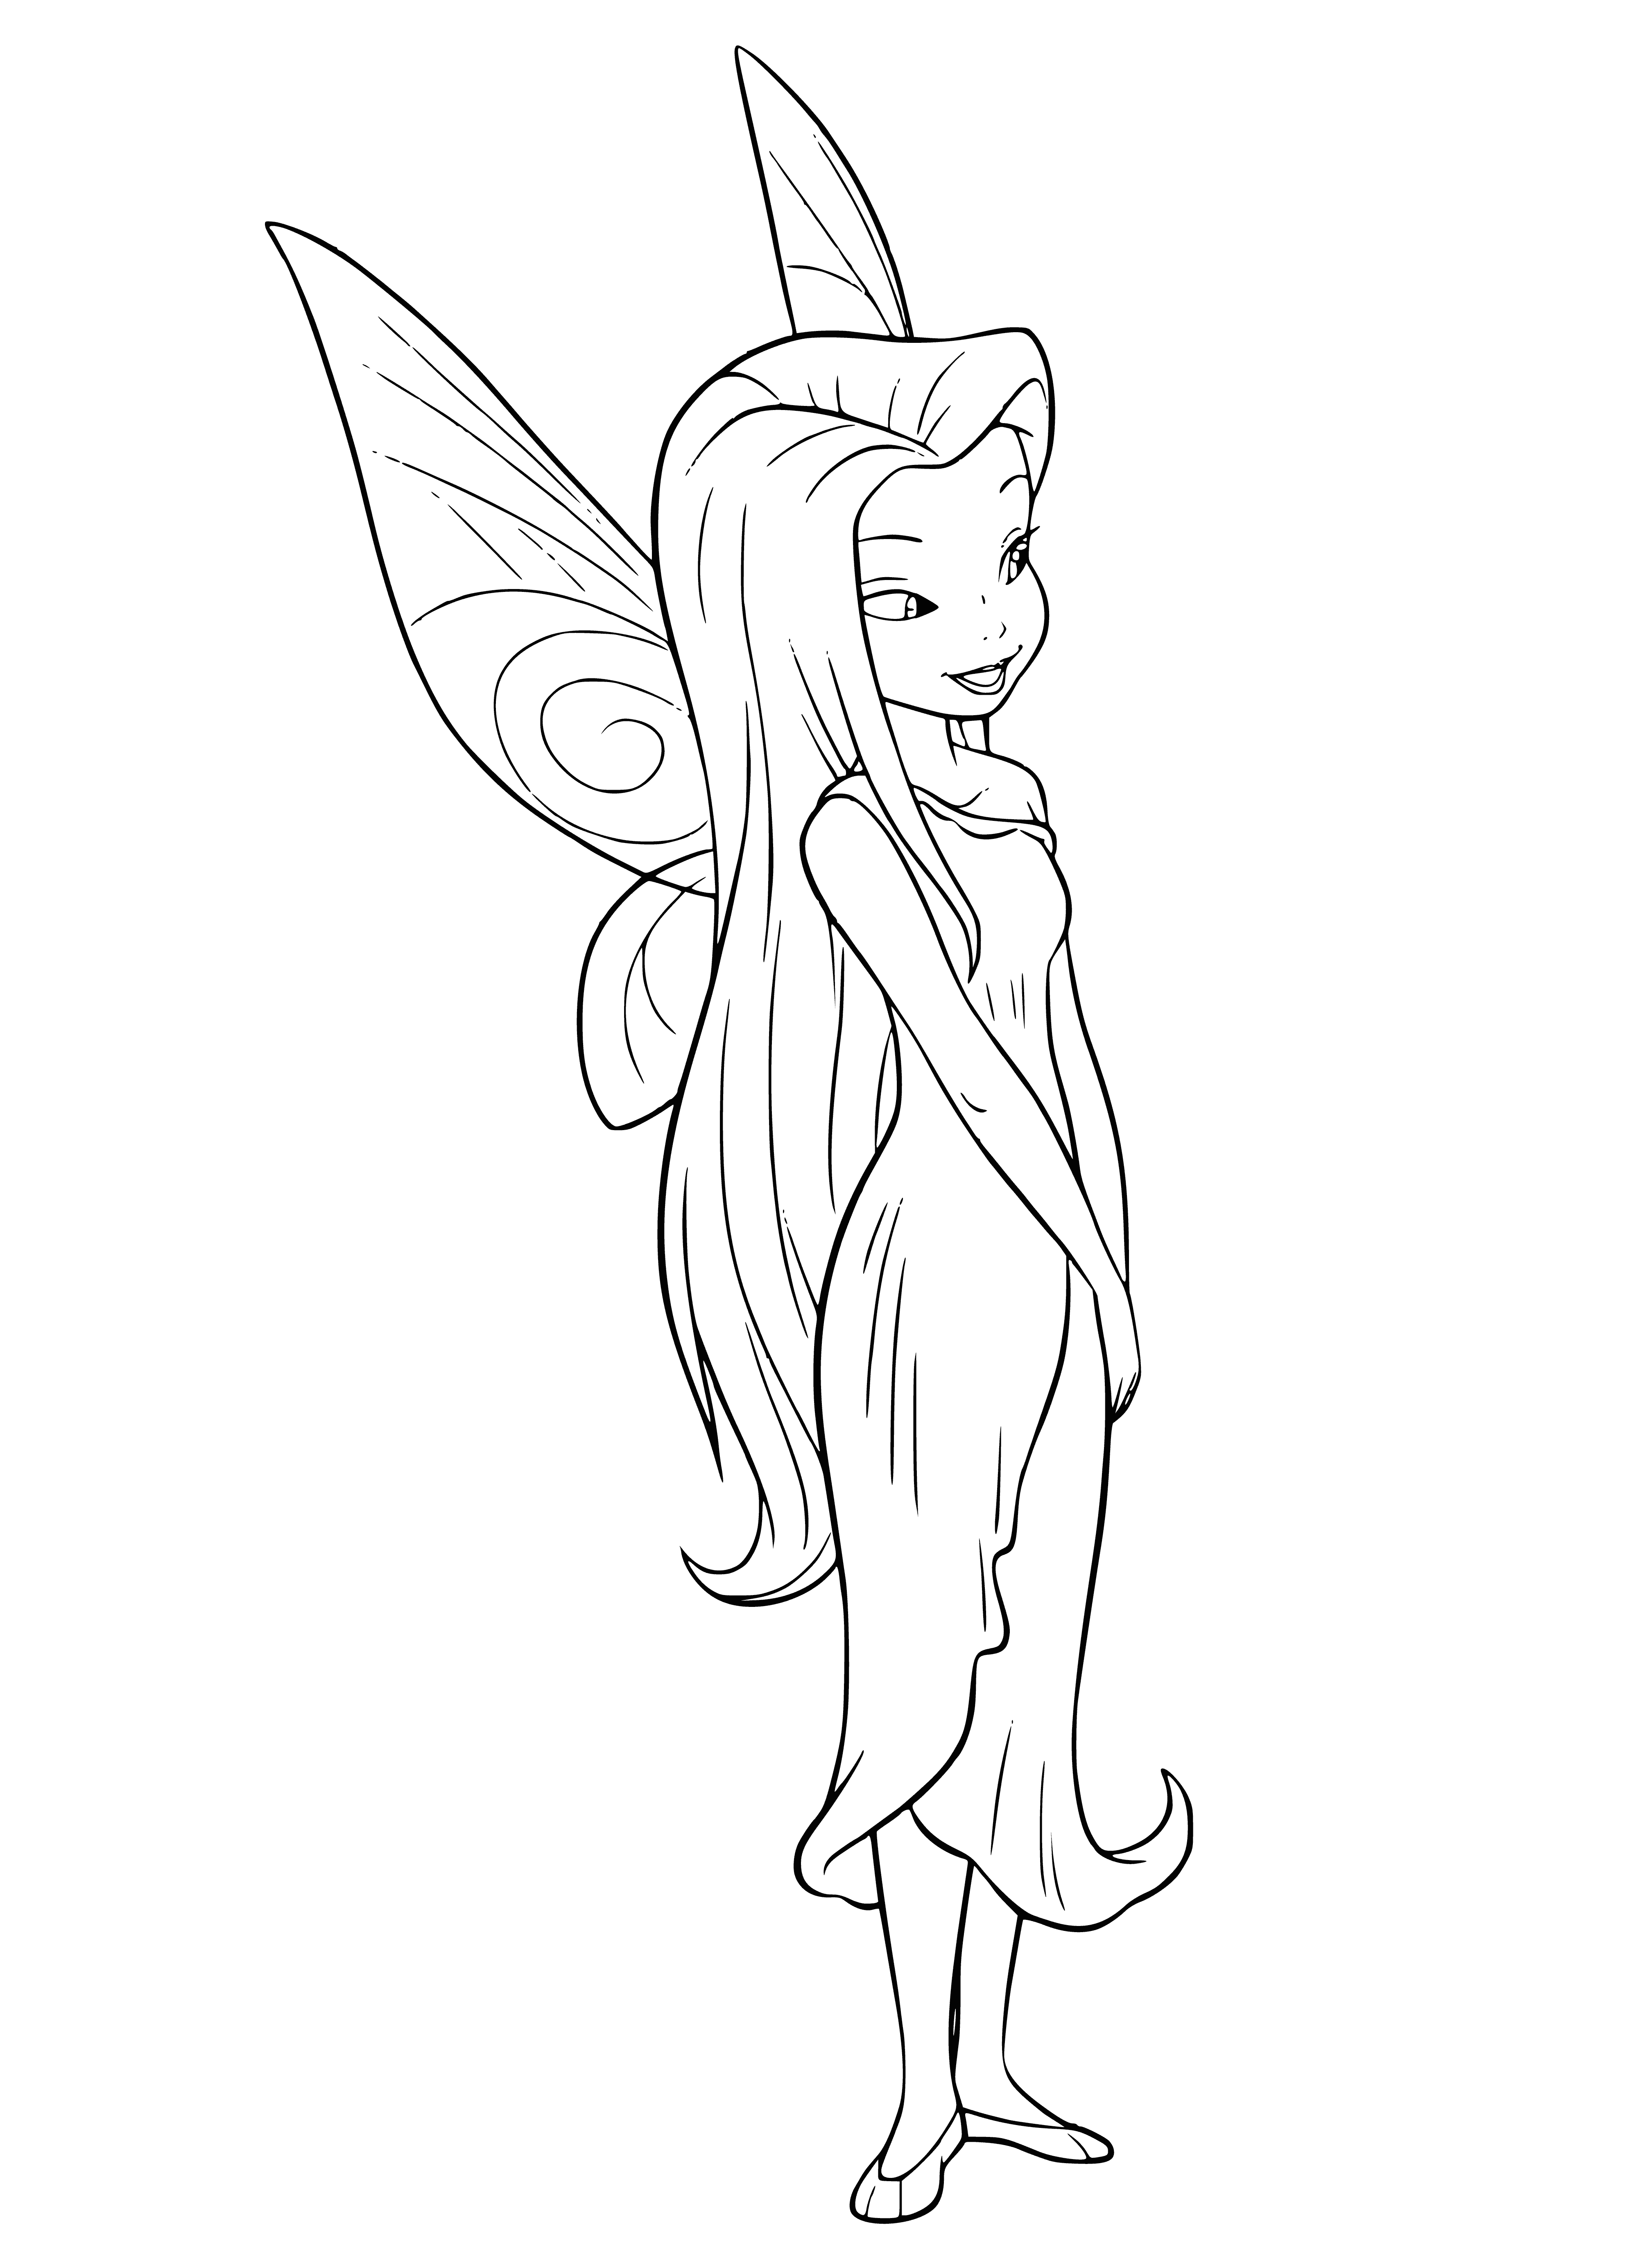 coloring page: Fairy Silver healed the NeverBeast and the two became friends, living in the enchanted forest and the NeverBeast swore to protect her always.